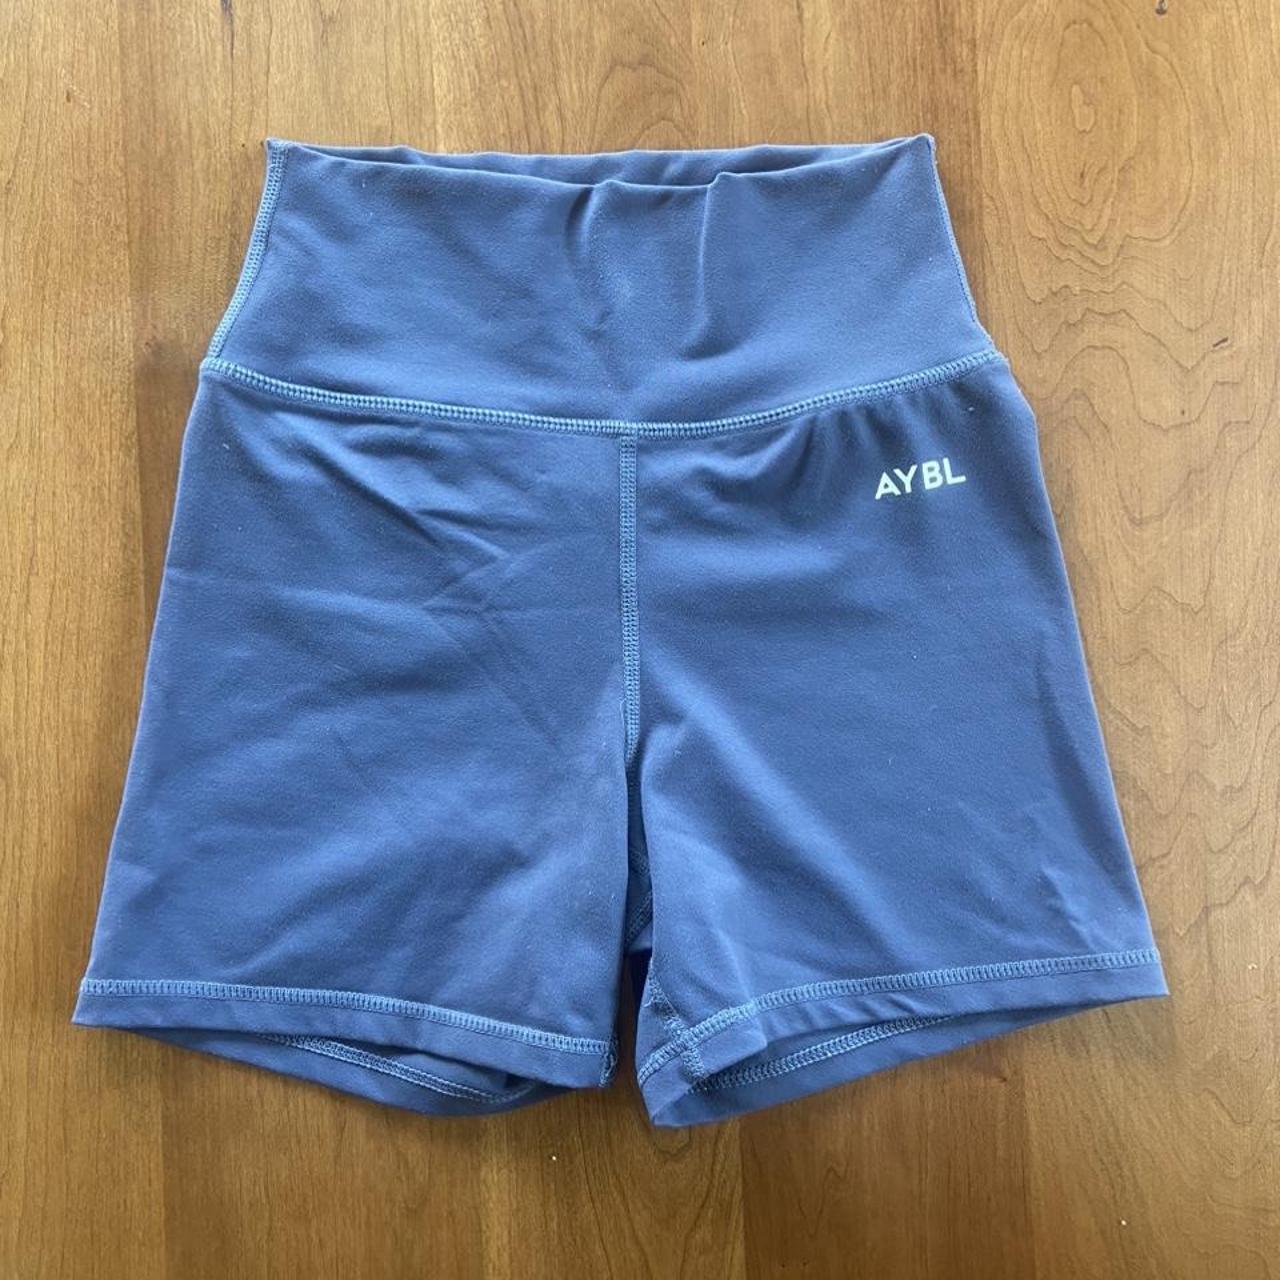 AYBL workout biker shorts in a size XS. these are so - Depop